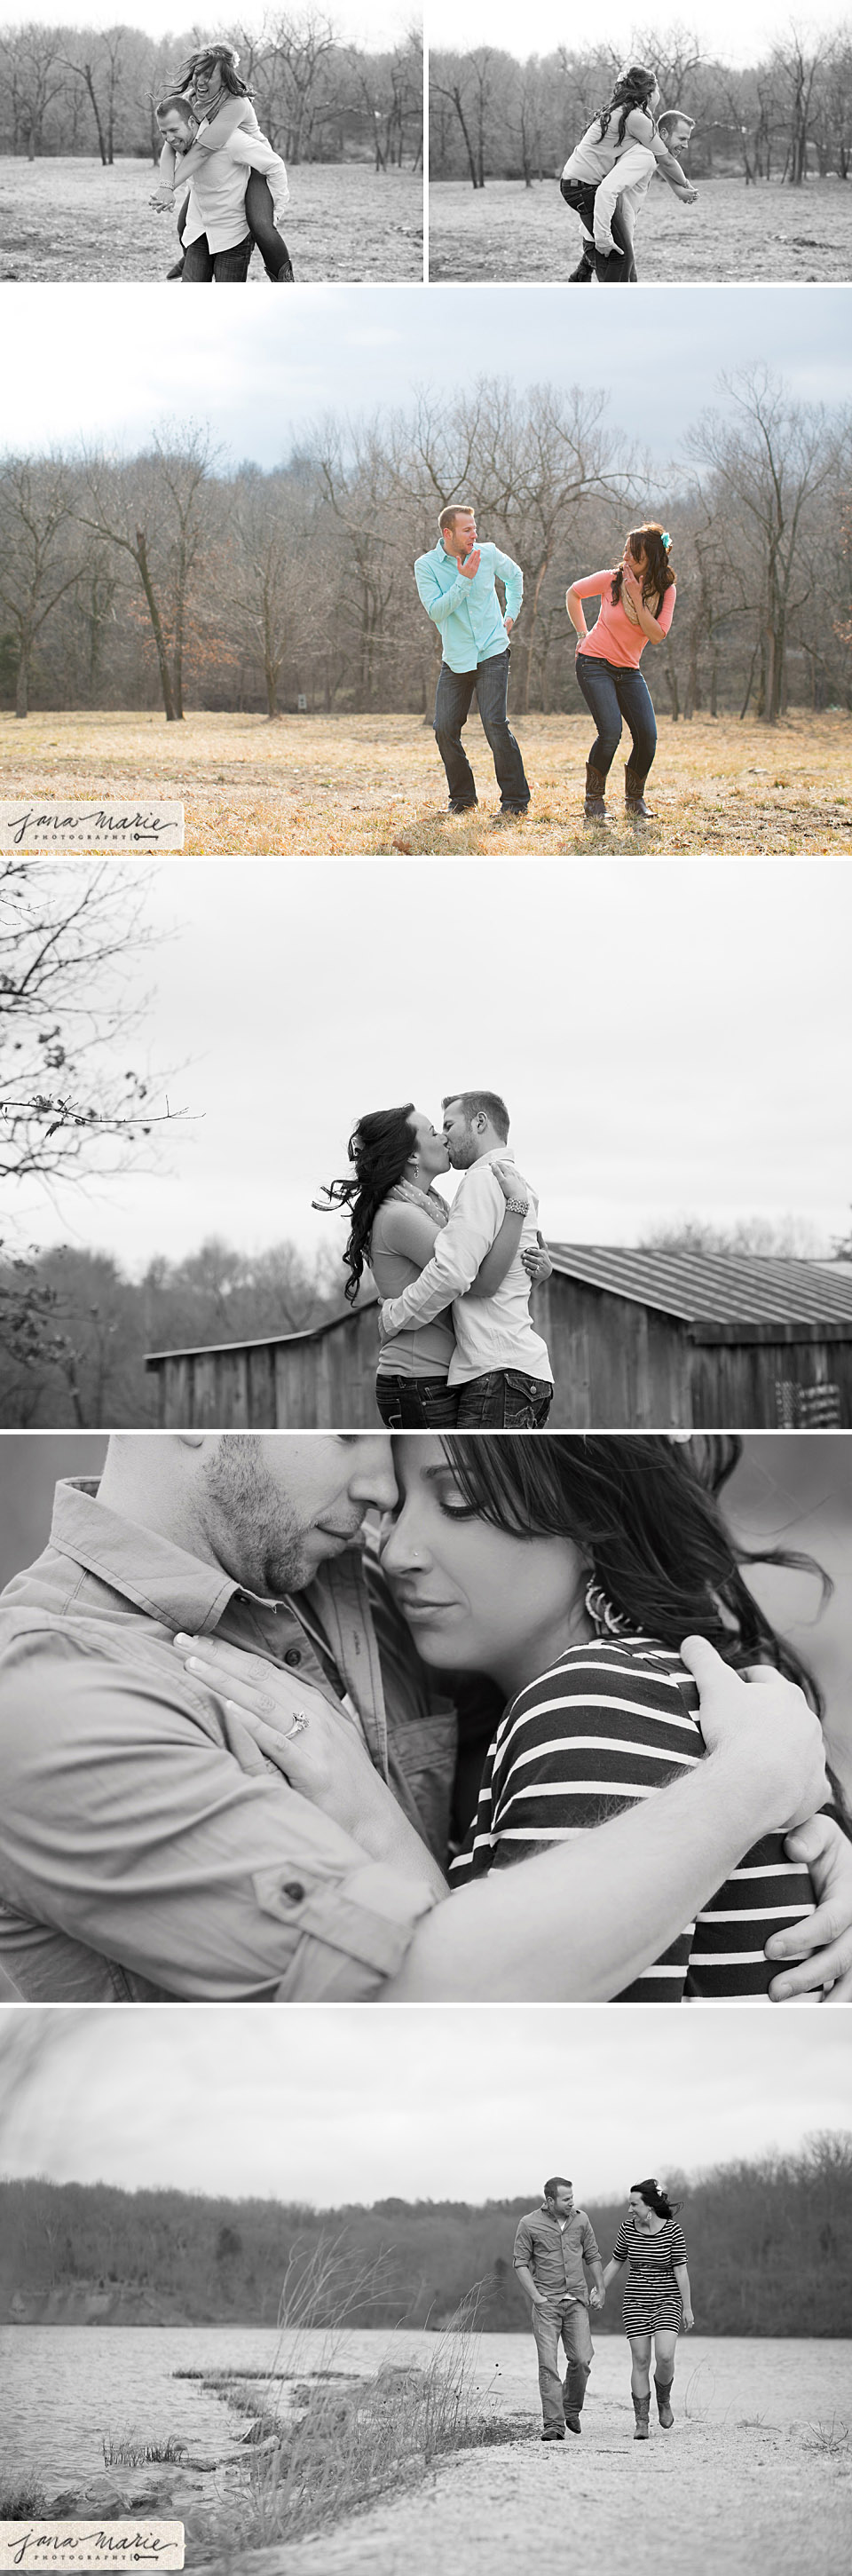 Love, Field Guide, Beloved techniques, Jana Marie Photography, Couples who love